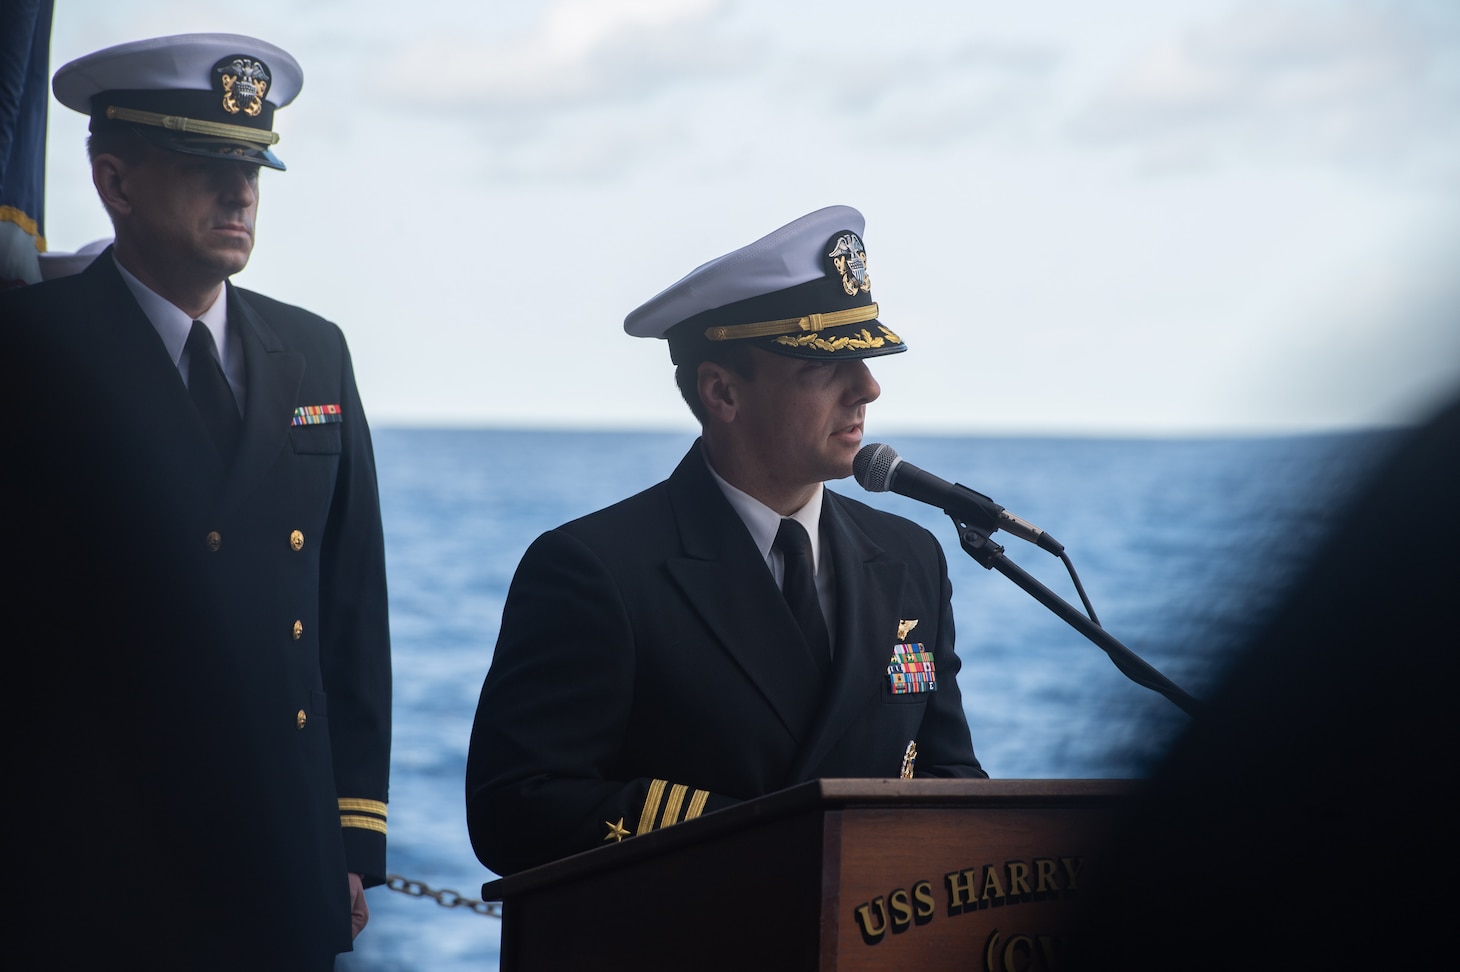 Cmdr.  Matthew Enos, executive officer of Strike Fighter Squadron (VFA) 11, gave a eulogy for his father during a buria at sea aboard the Nimitz-class aircraft carrier USS Harry S. Truman (CVN 75), Dec. 11, 2021.